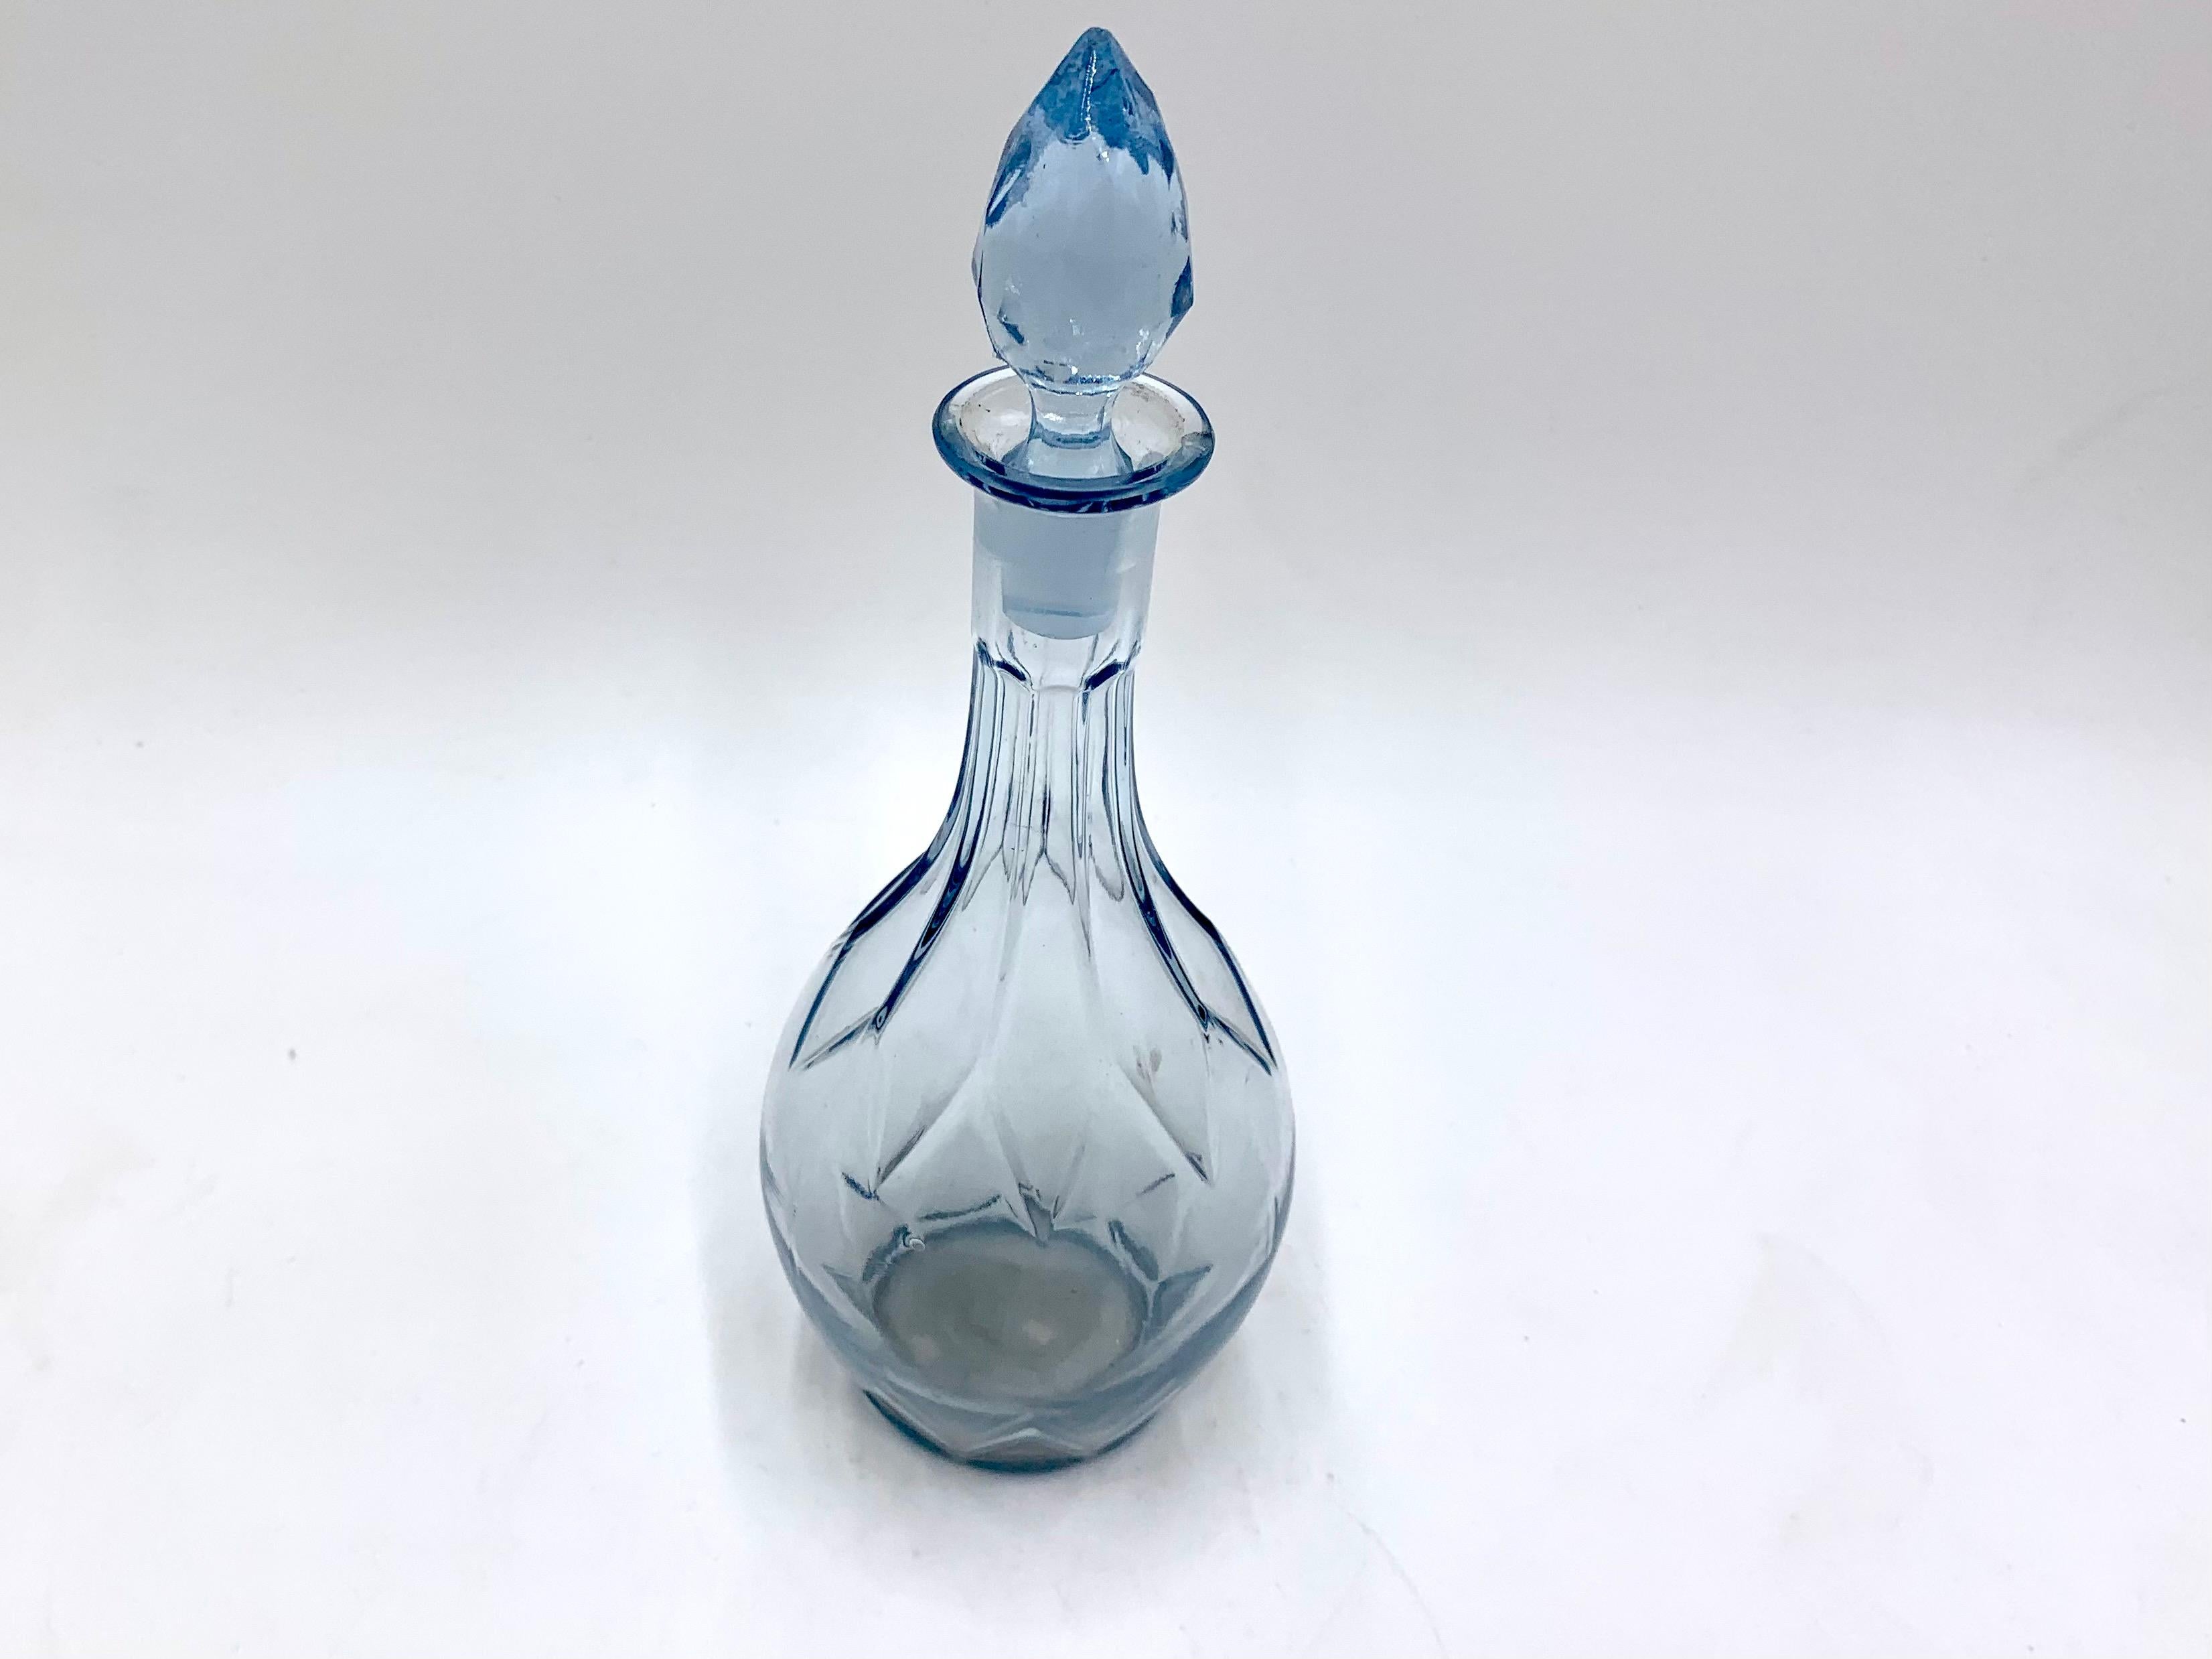 Blue glass decanter for liquor
Produced in Poland in 1930s. 
Very good condition.
 